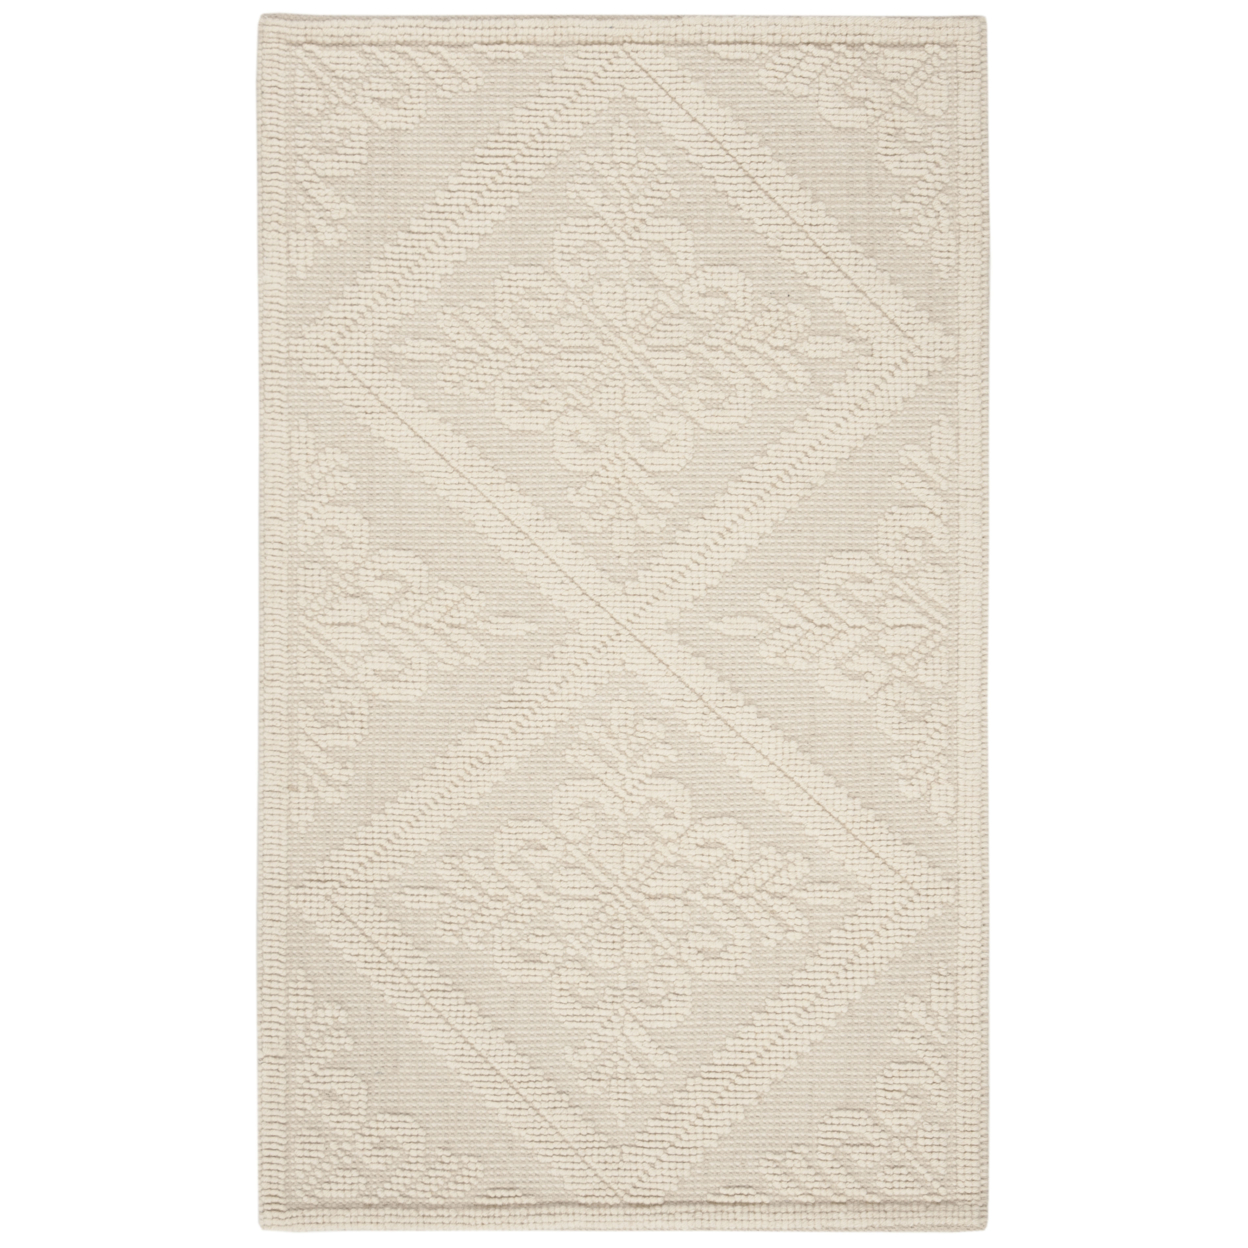 SAFAVIEH Vermont Collection VRM306A Handwoven Ivory Rug - 6 X 9